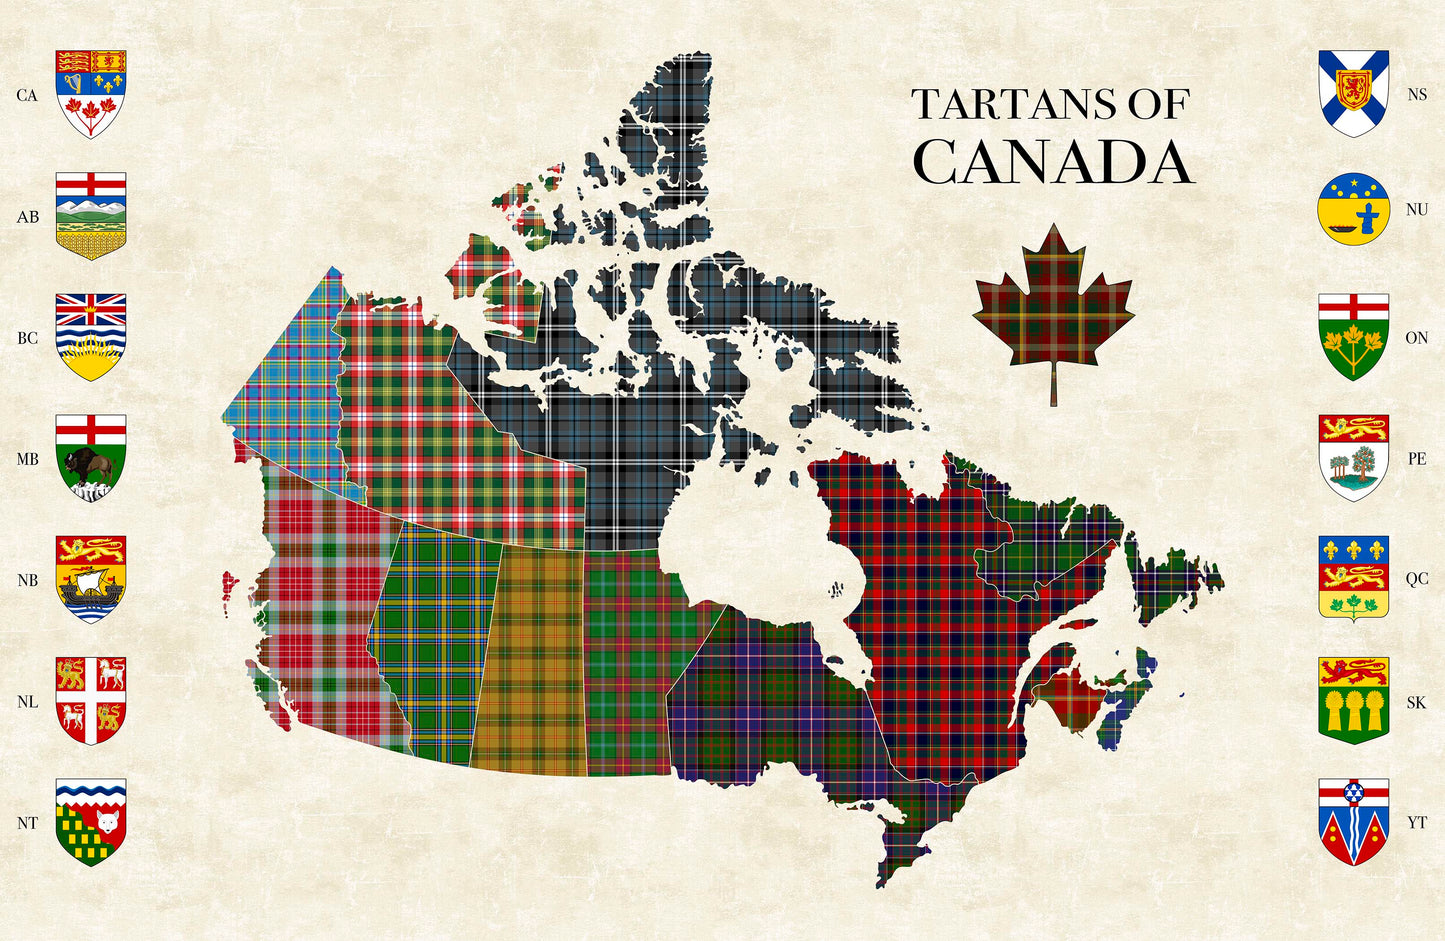 Tartan Traditions Newfoundland Green Multi W25582-76 by Northcott Fabrics (Sold in 25cm increments)